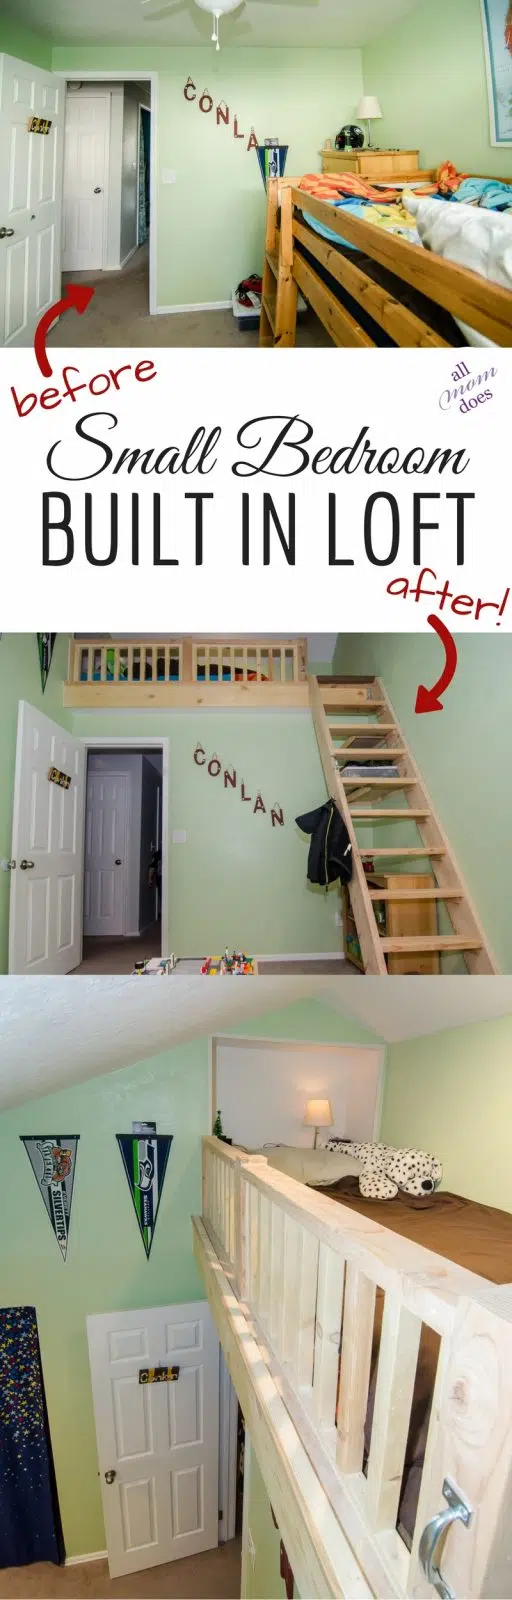 Maximize a small bedroom with a built in loft in wasted attic space! #diy #loft